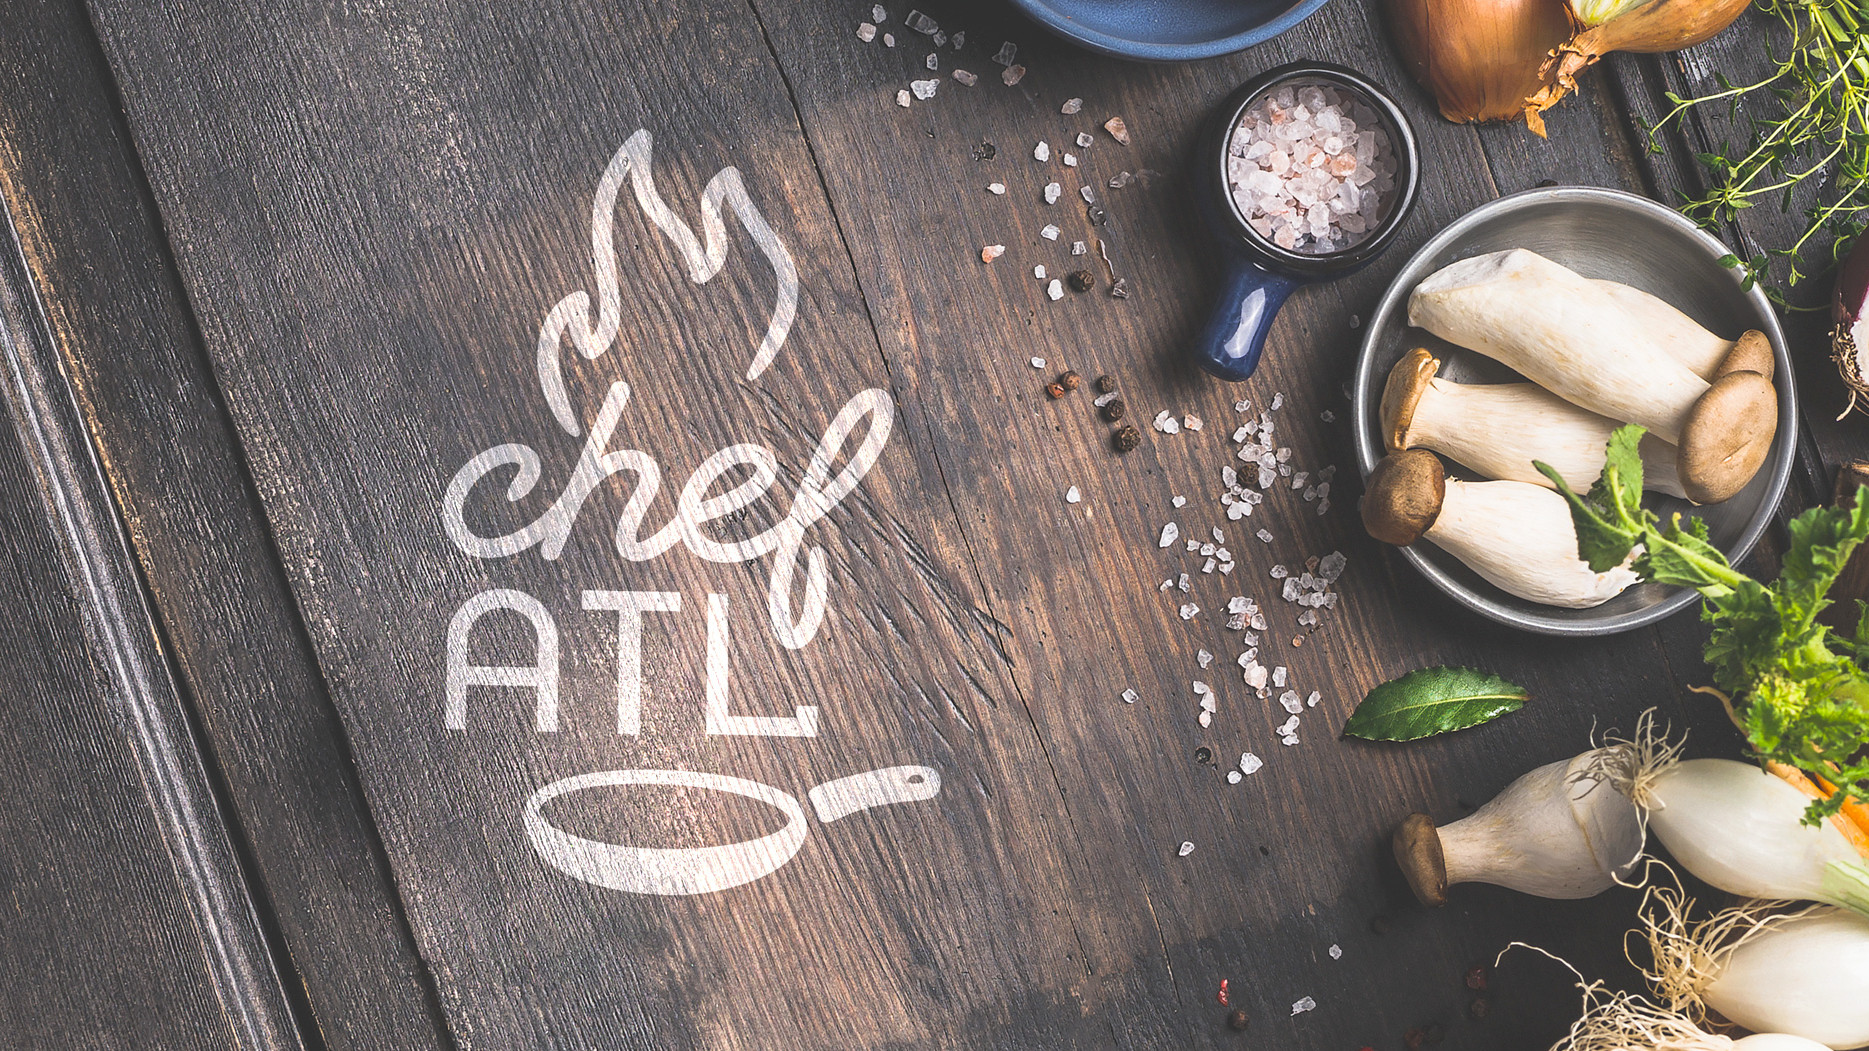 promo image for chefATL